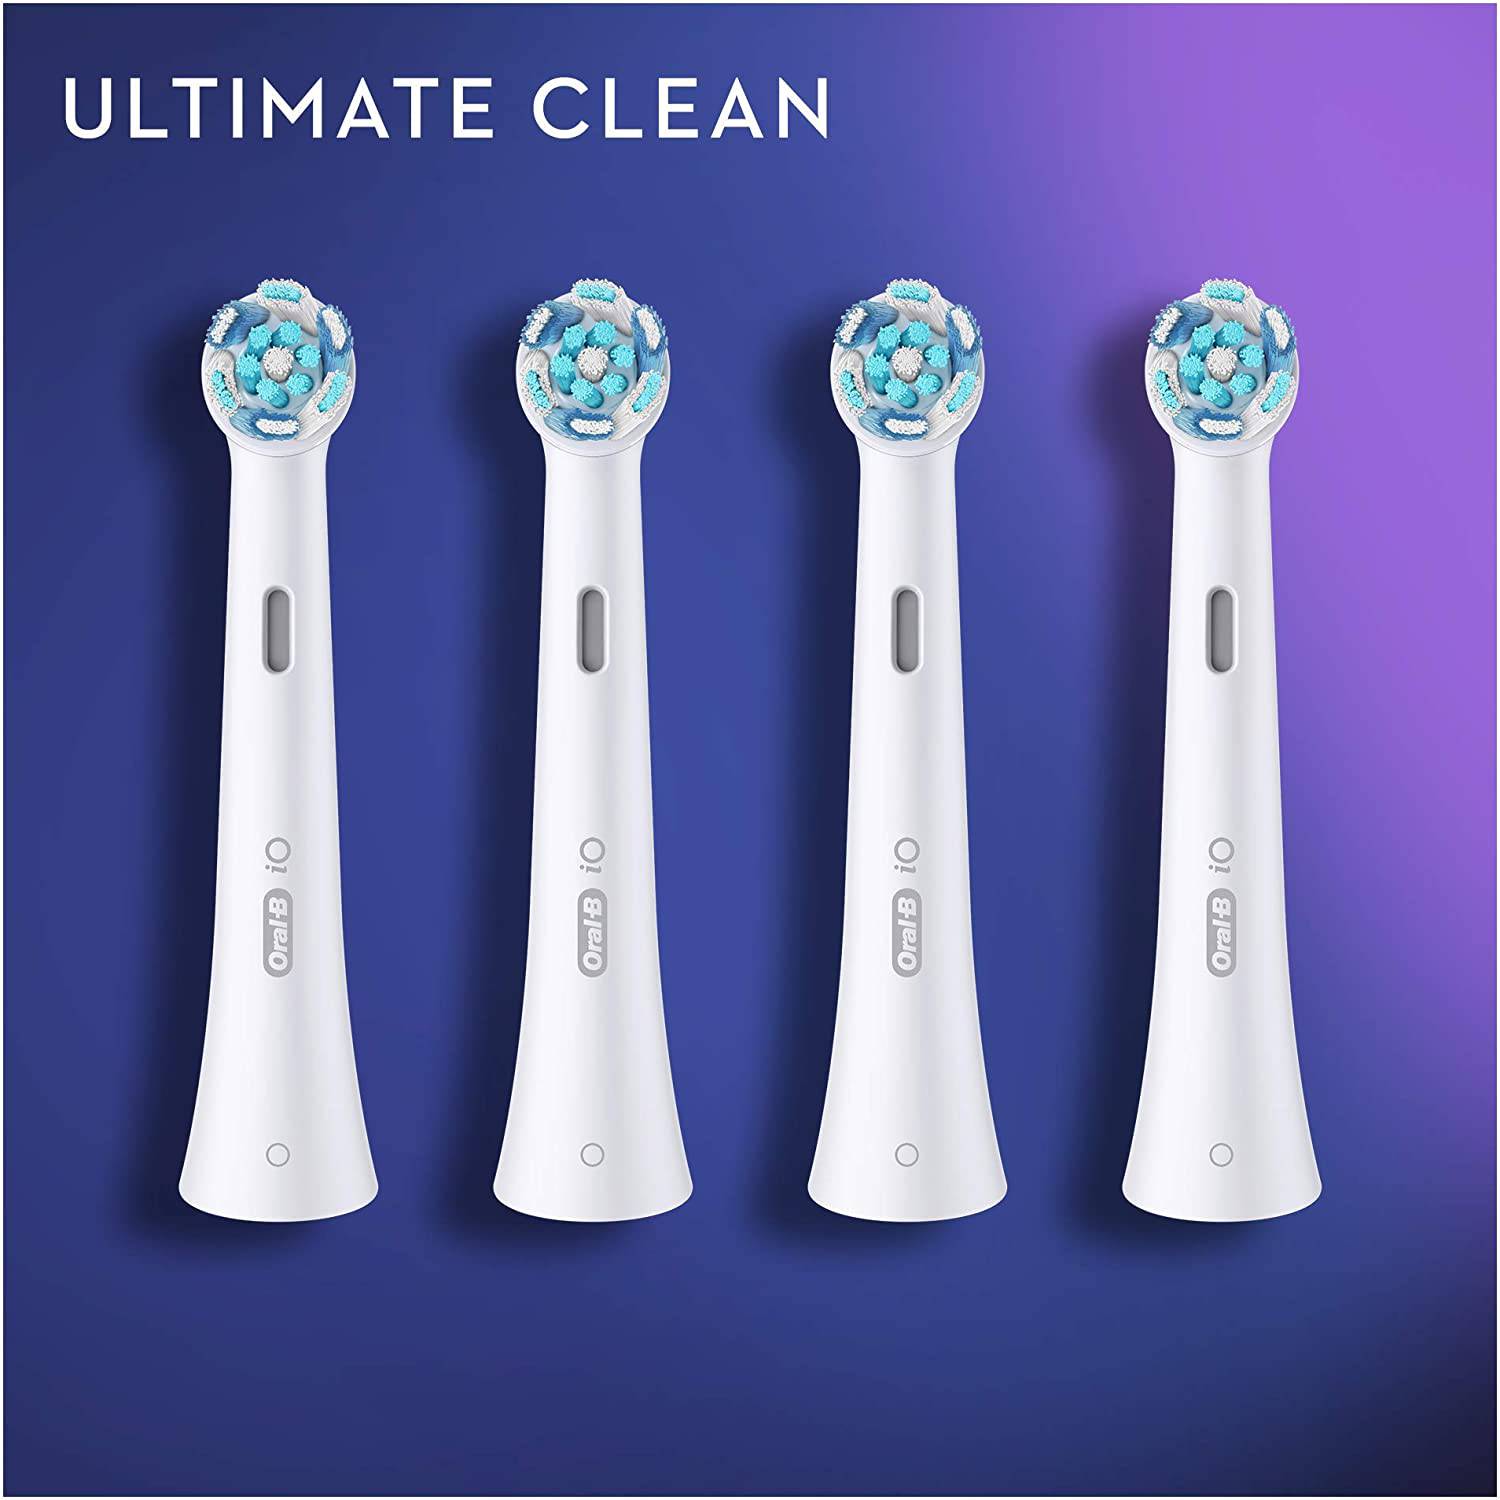 Oral-B iO 4pk Ultimate Clean Toothbrush Replacement Heads - White - Healthxpress.ie